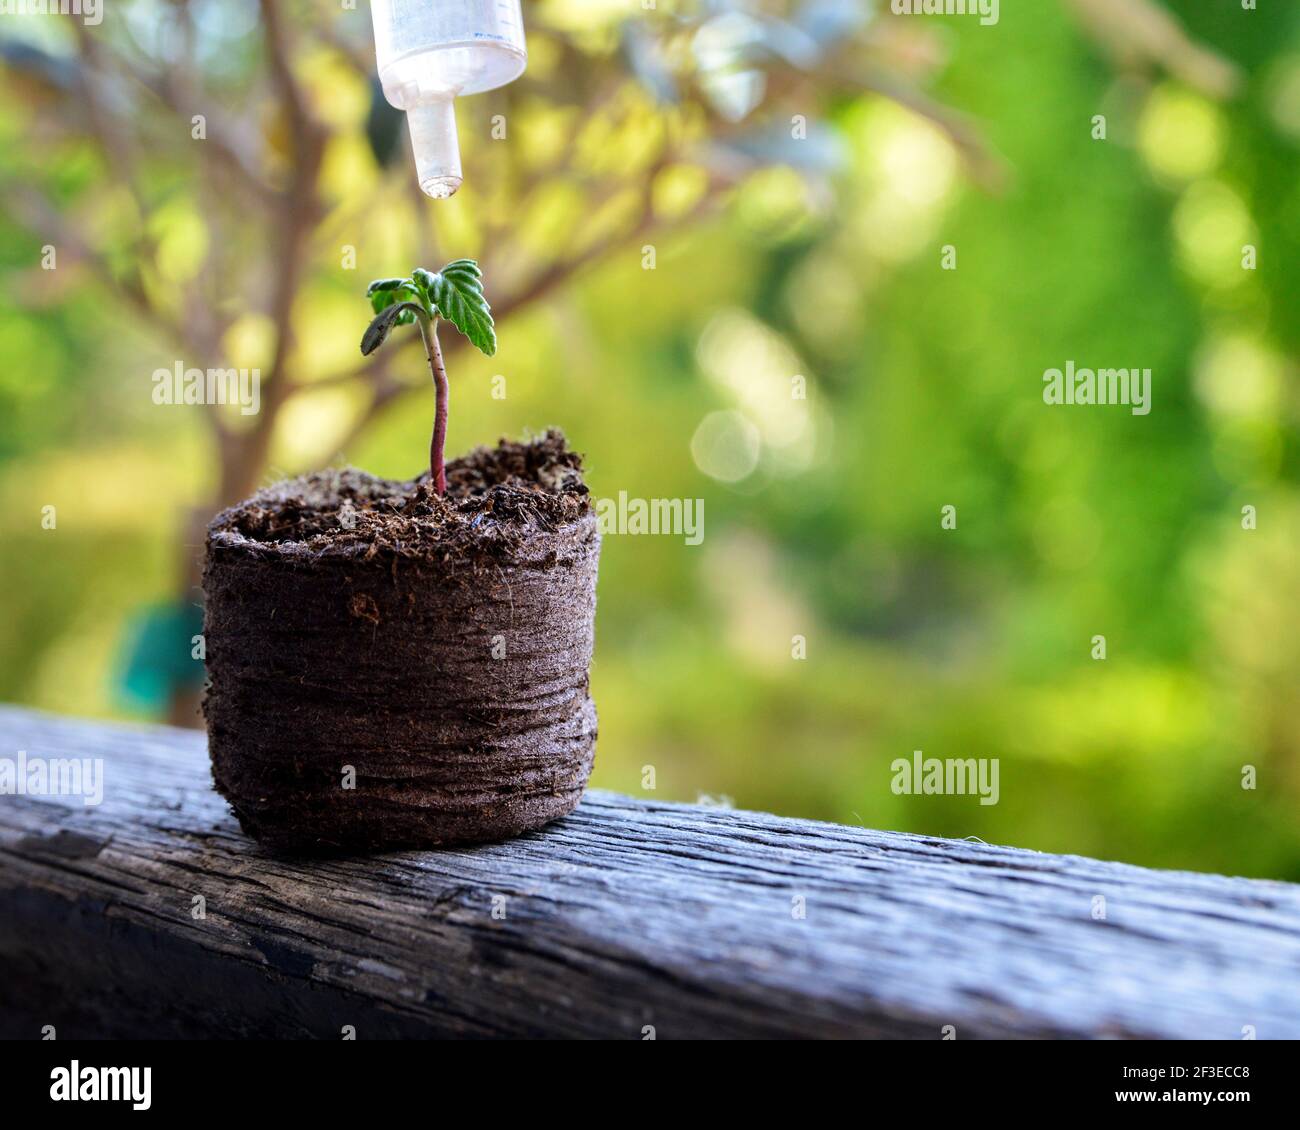 Watering of a plant sprout with dropper during the drought. Stock Photo